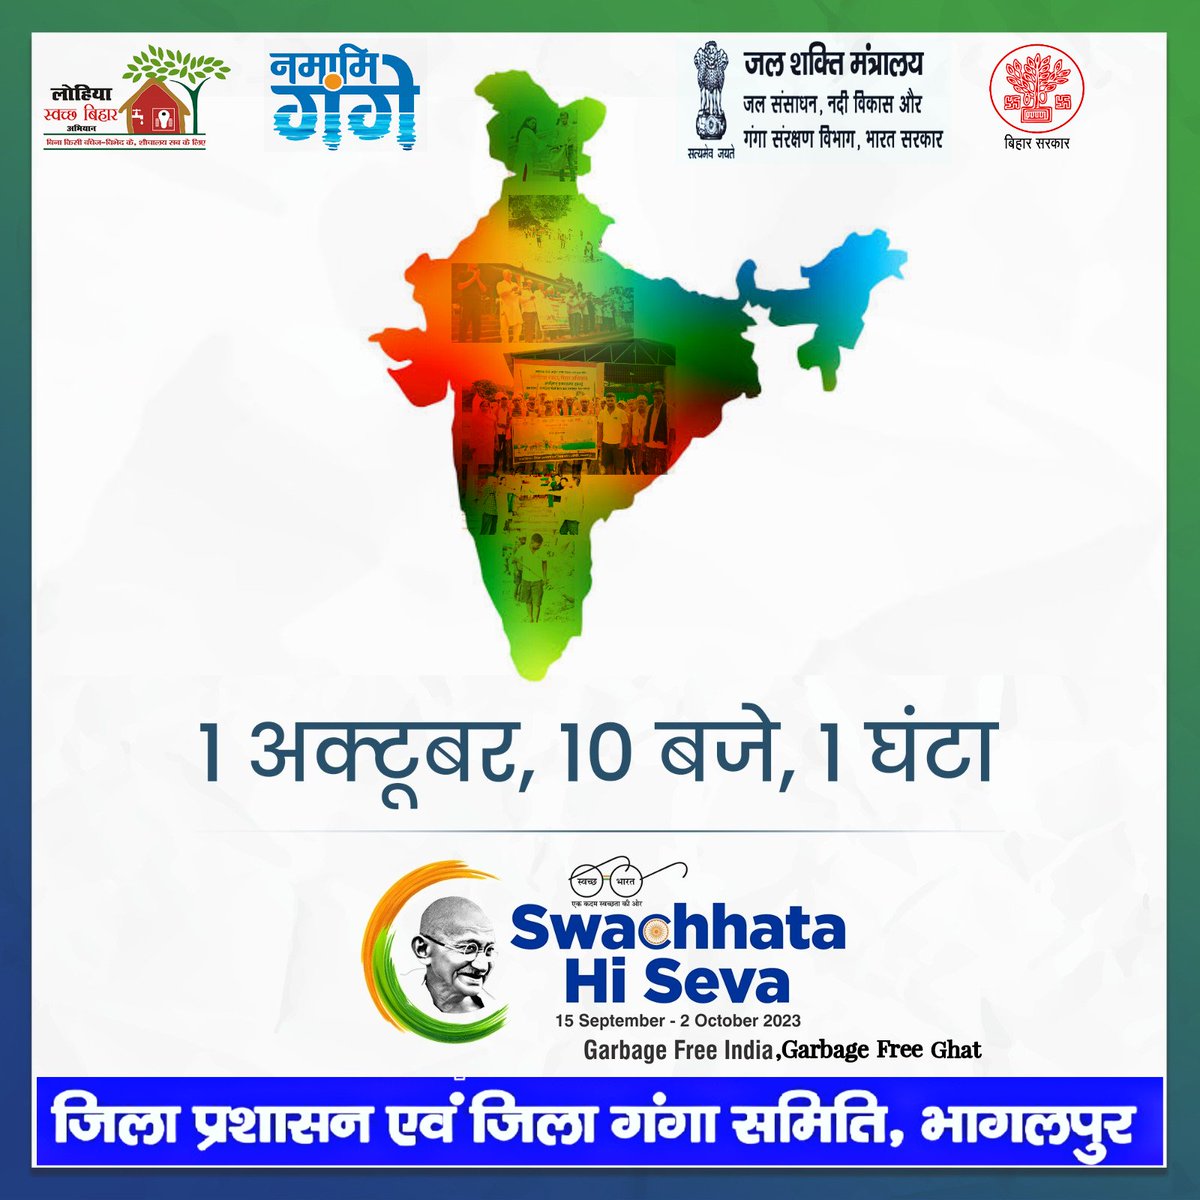 Cleanliness is our duty because a clean nation is our pride. To celebrate swachhata pakhawada, join the cleanliness drive at 10 AM and let’s march towards a cleaner India by participating in Shramdaan for one hour on 1st October 2023 #SwachhataHiSeva @cleanganganmcg @asokji